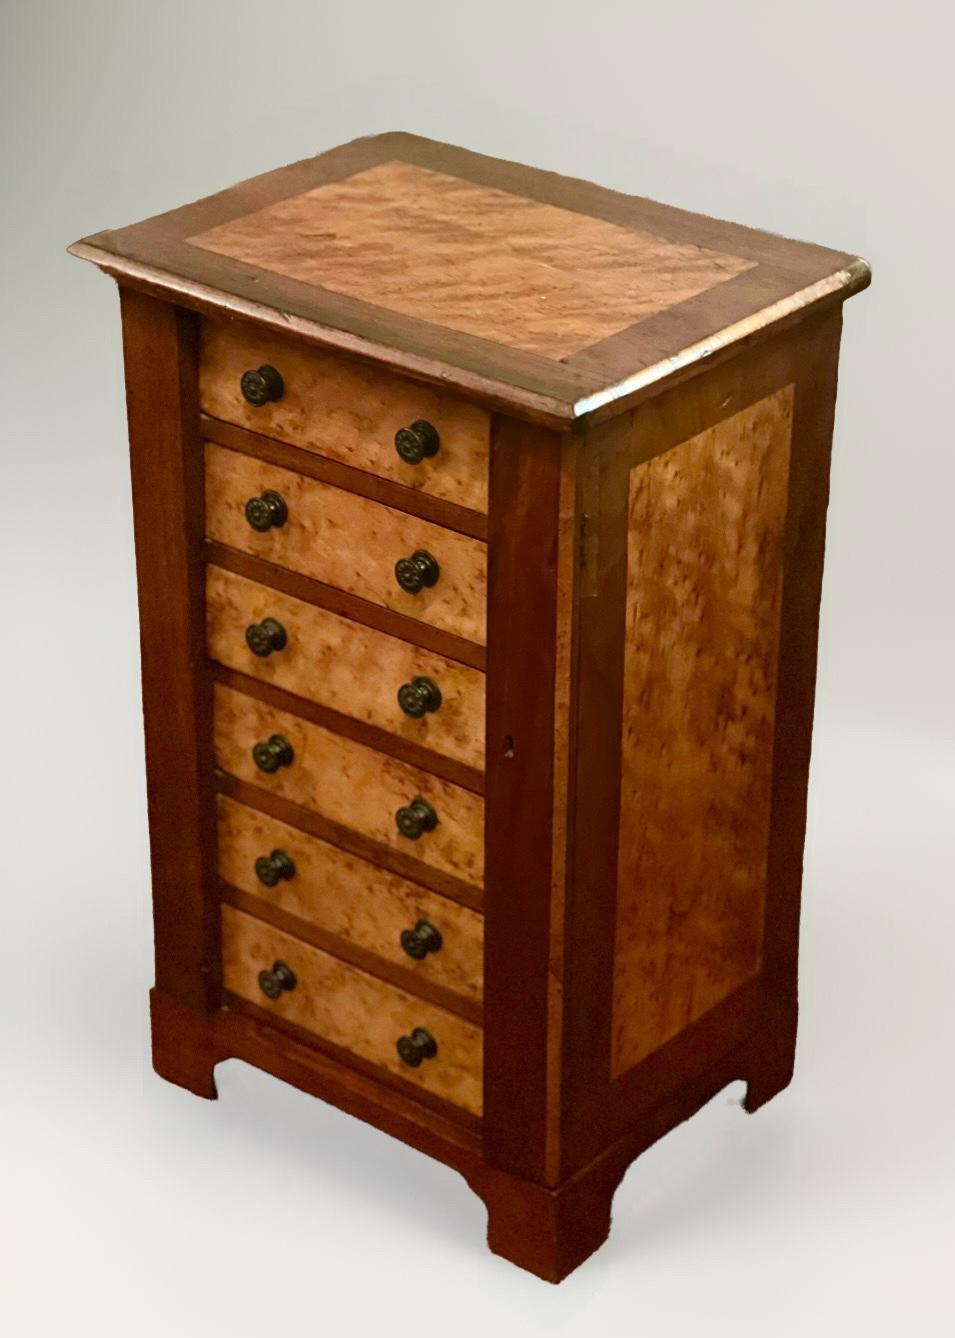 Mahogany and burl maple miniature Wellington chest, England, c. 1890-1900.

Rare, handcrafted petite chest with beautiful contrasting wood grains featuring six dovetailed drawers with rosette knobs, set upon bracket feet. Top drawer has